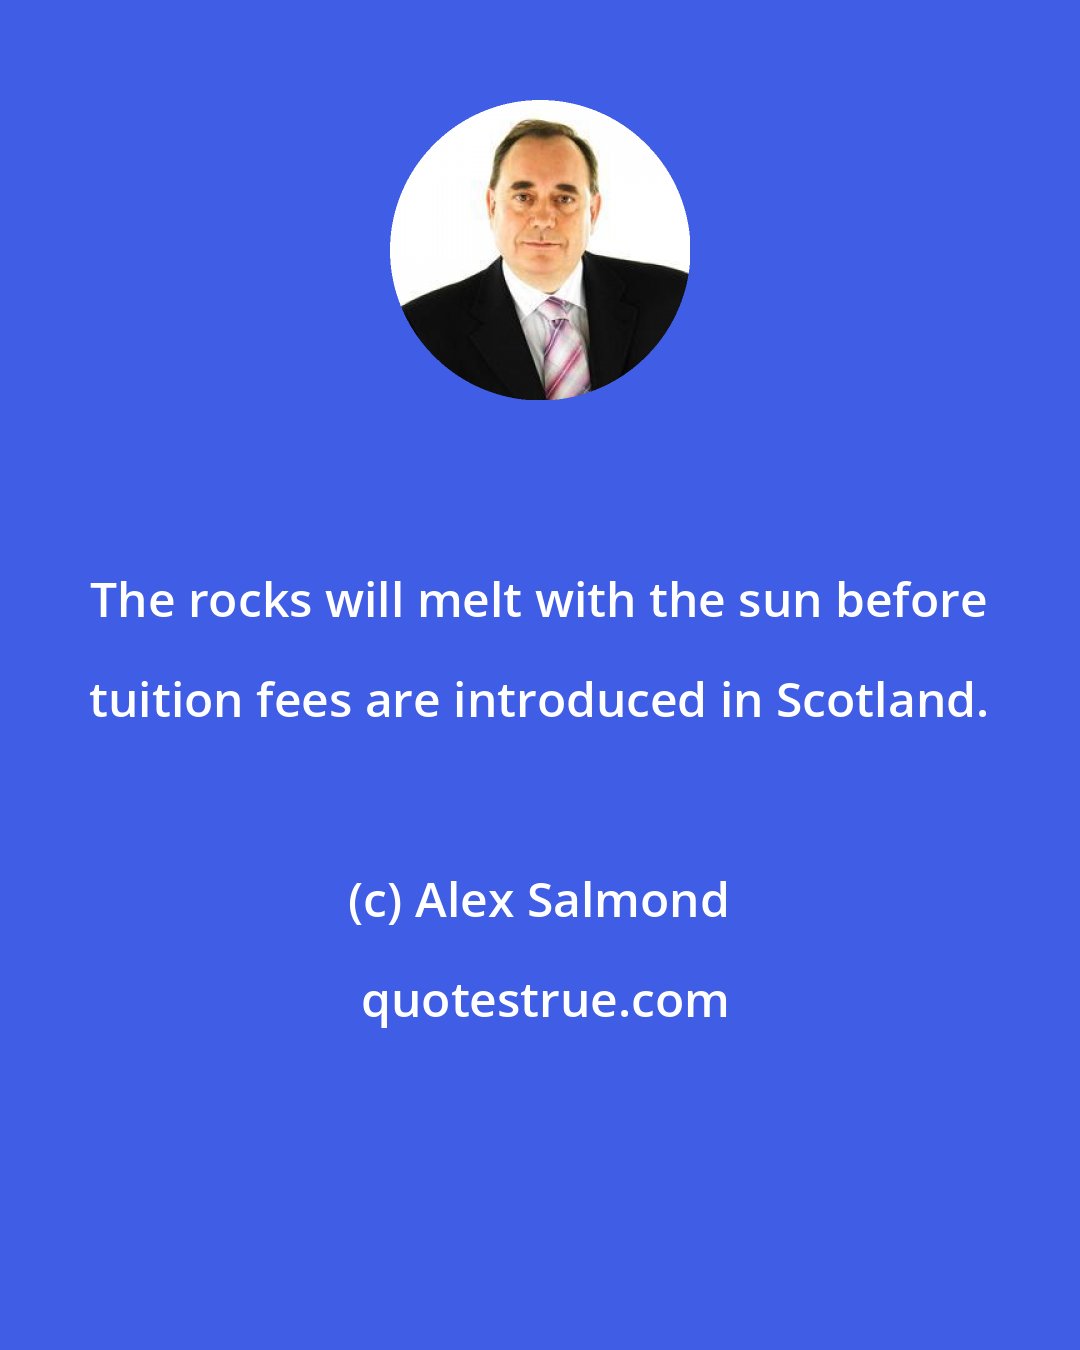 Alex Salmond: The rocks will melt with the sun before tuition fees are introduced in Scotland.